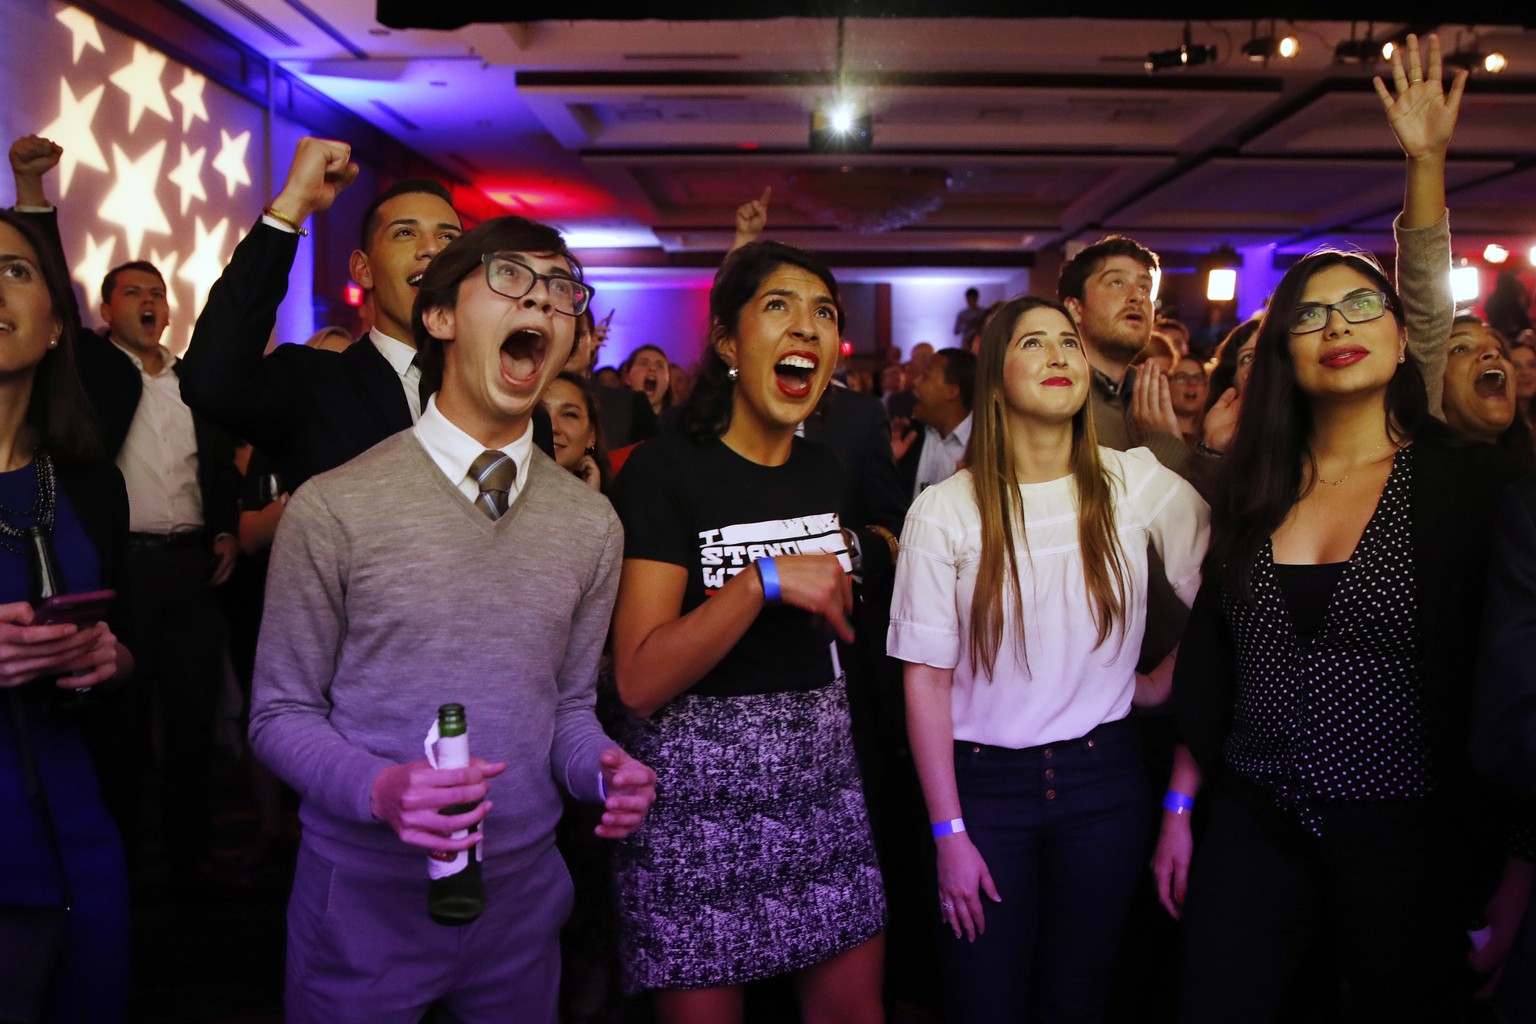 Jed Bush, 24, left, of Washington, a Hill staffer, Maria Praeli, 25, a DACA recipient, and Katie Aragon, 26, react to Democratic wins in the House of Representatives, during a Democratic party electio ...